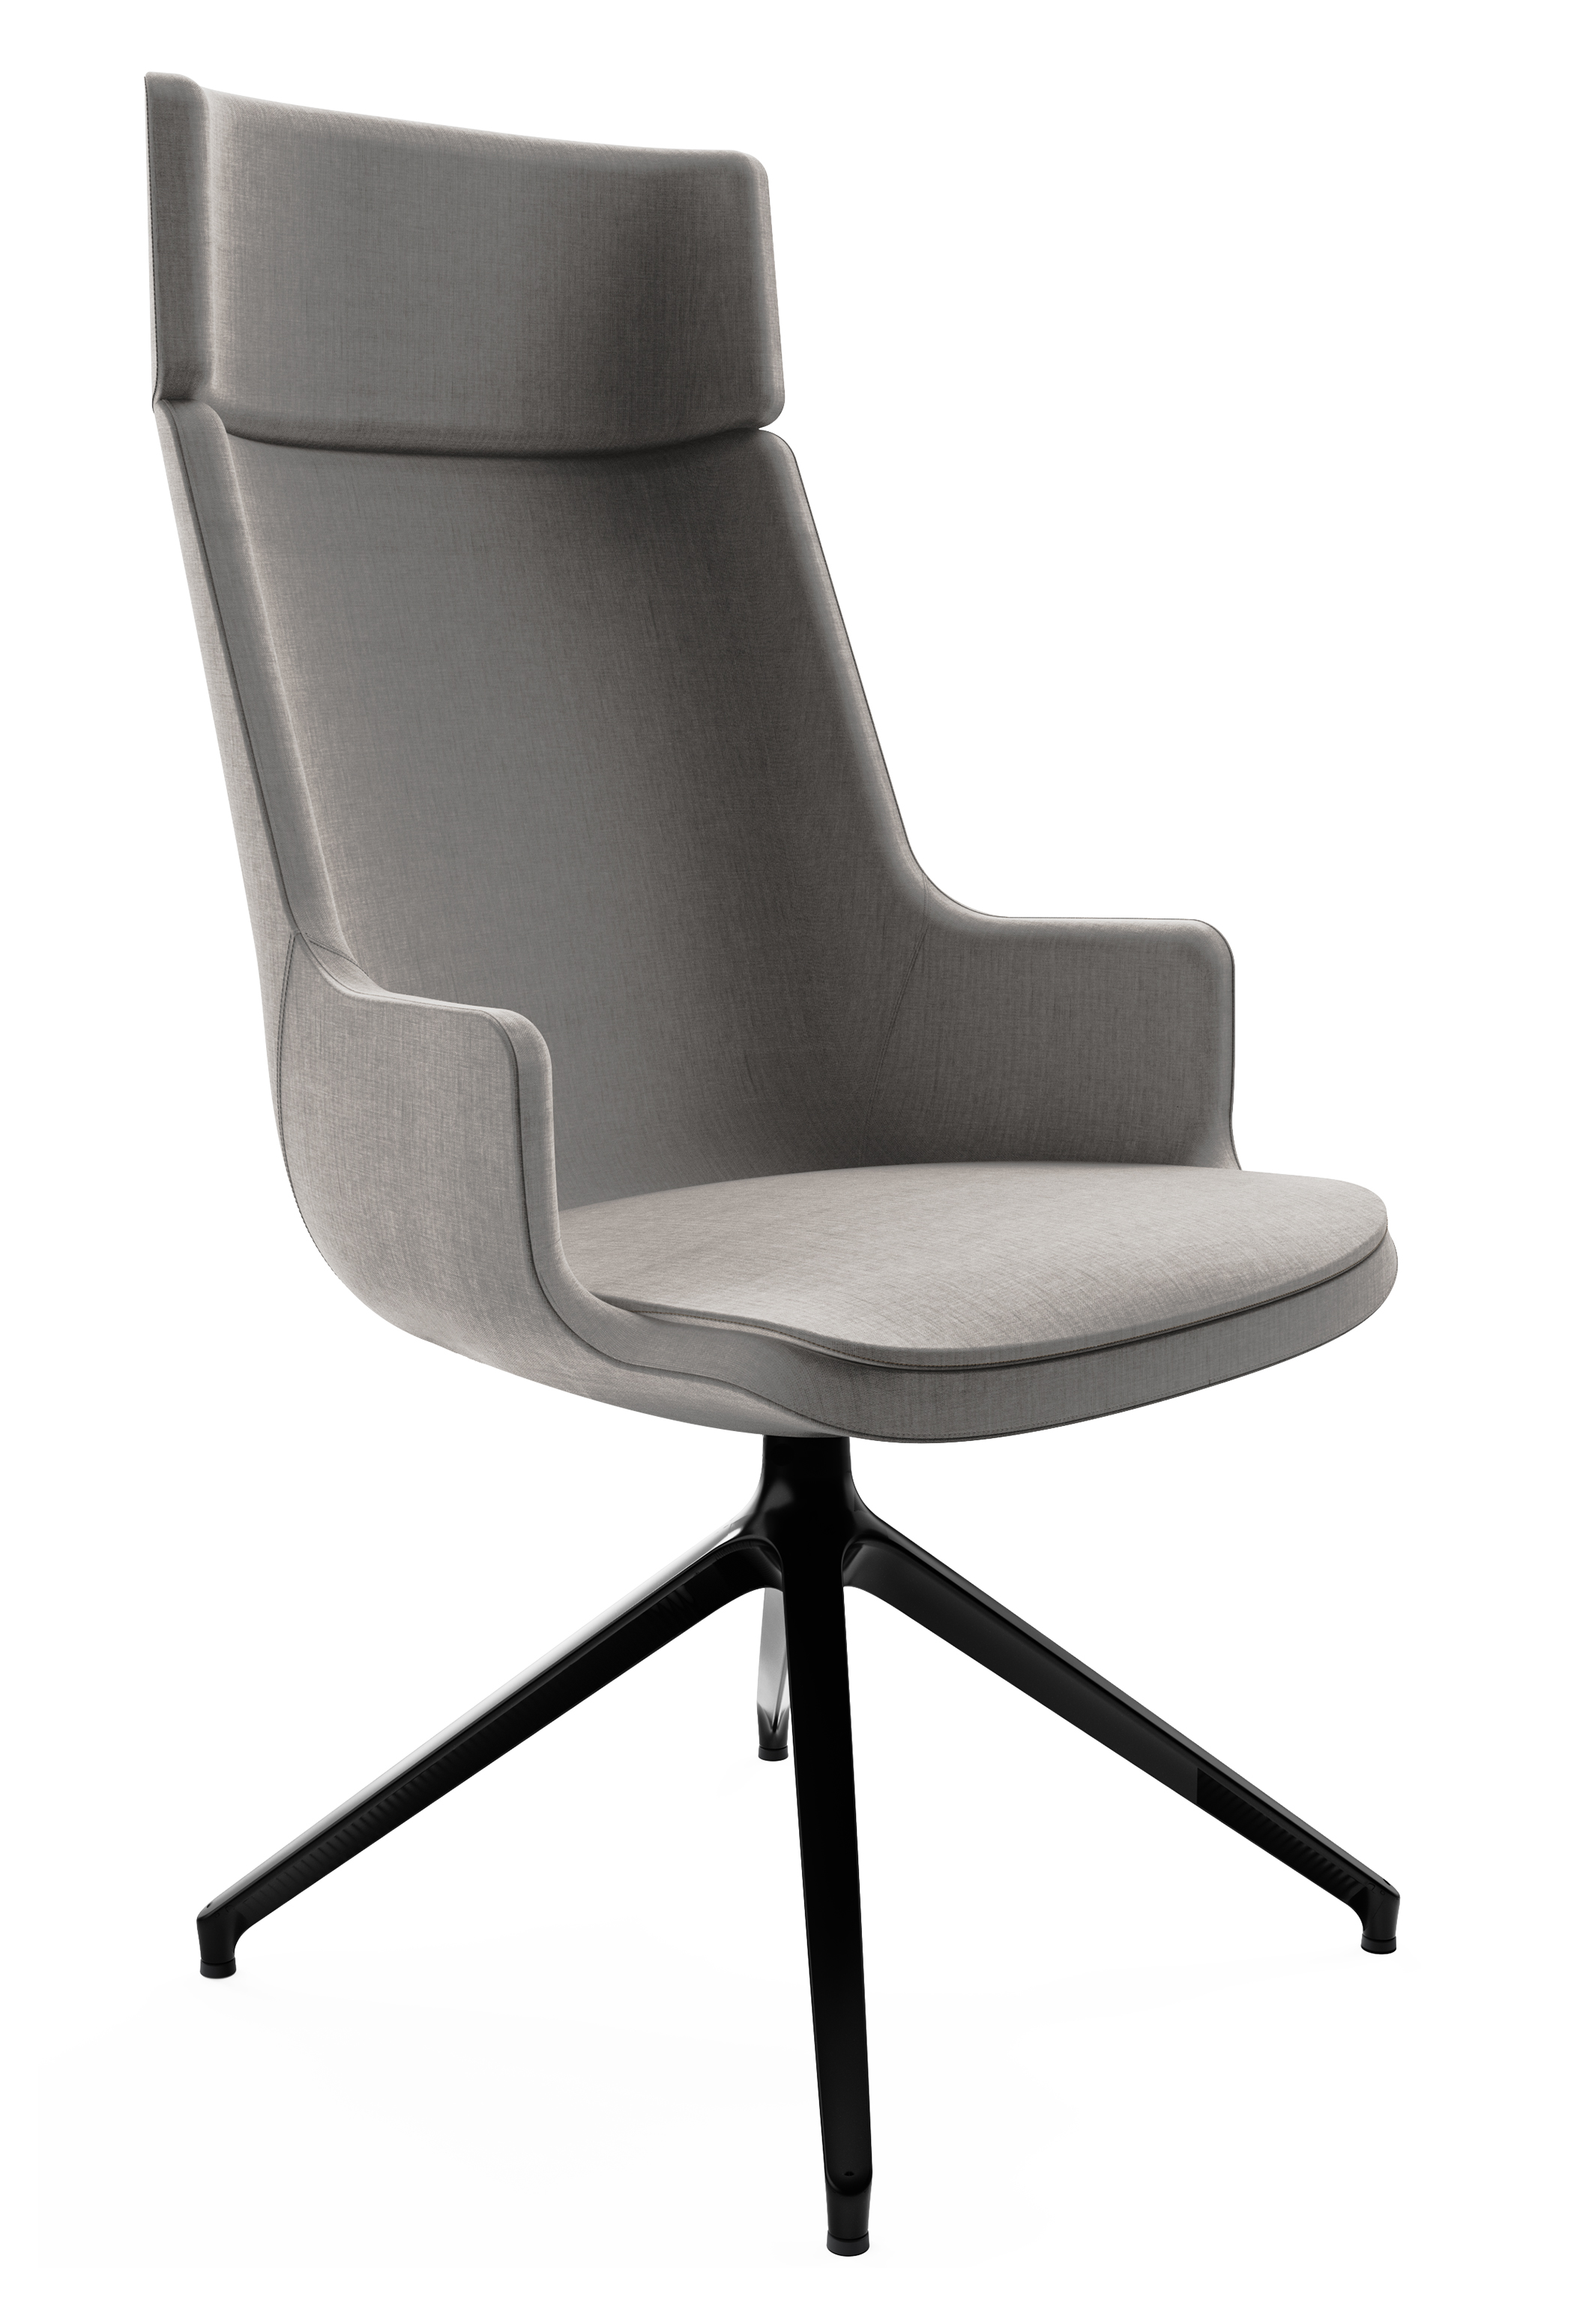 WS - Contour chair - High, 4 star black base (Front angle)